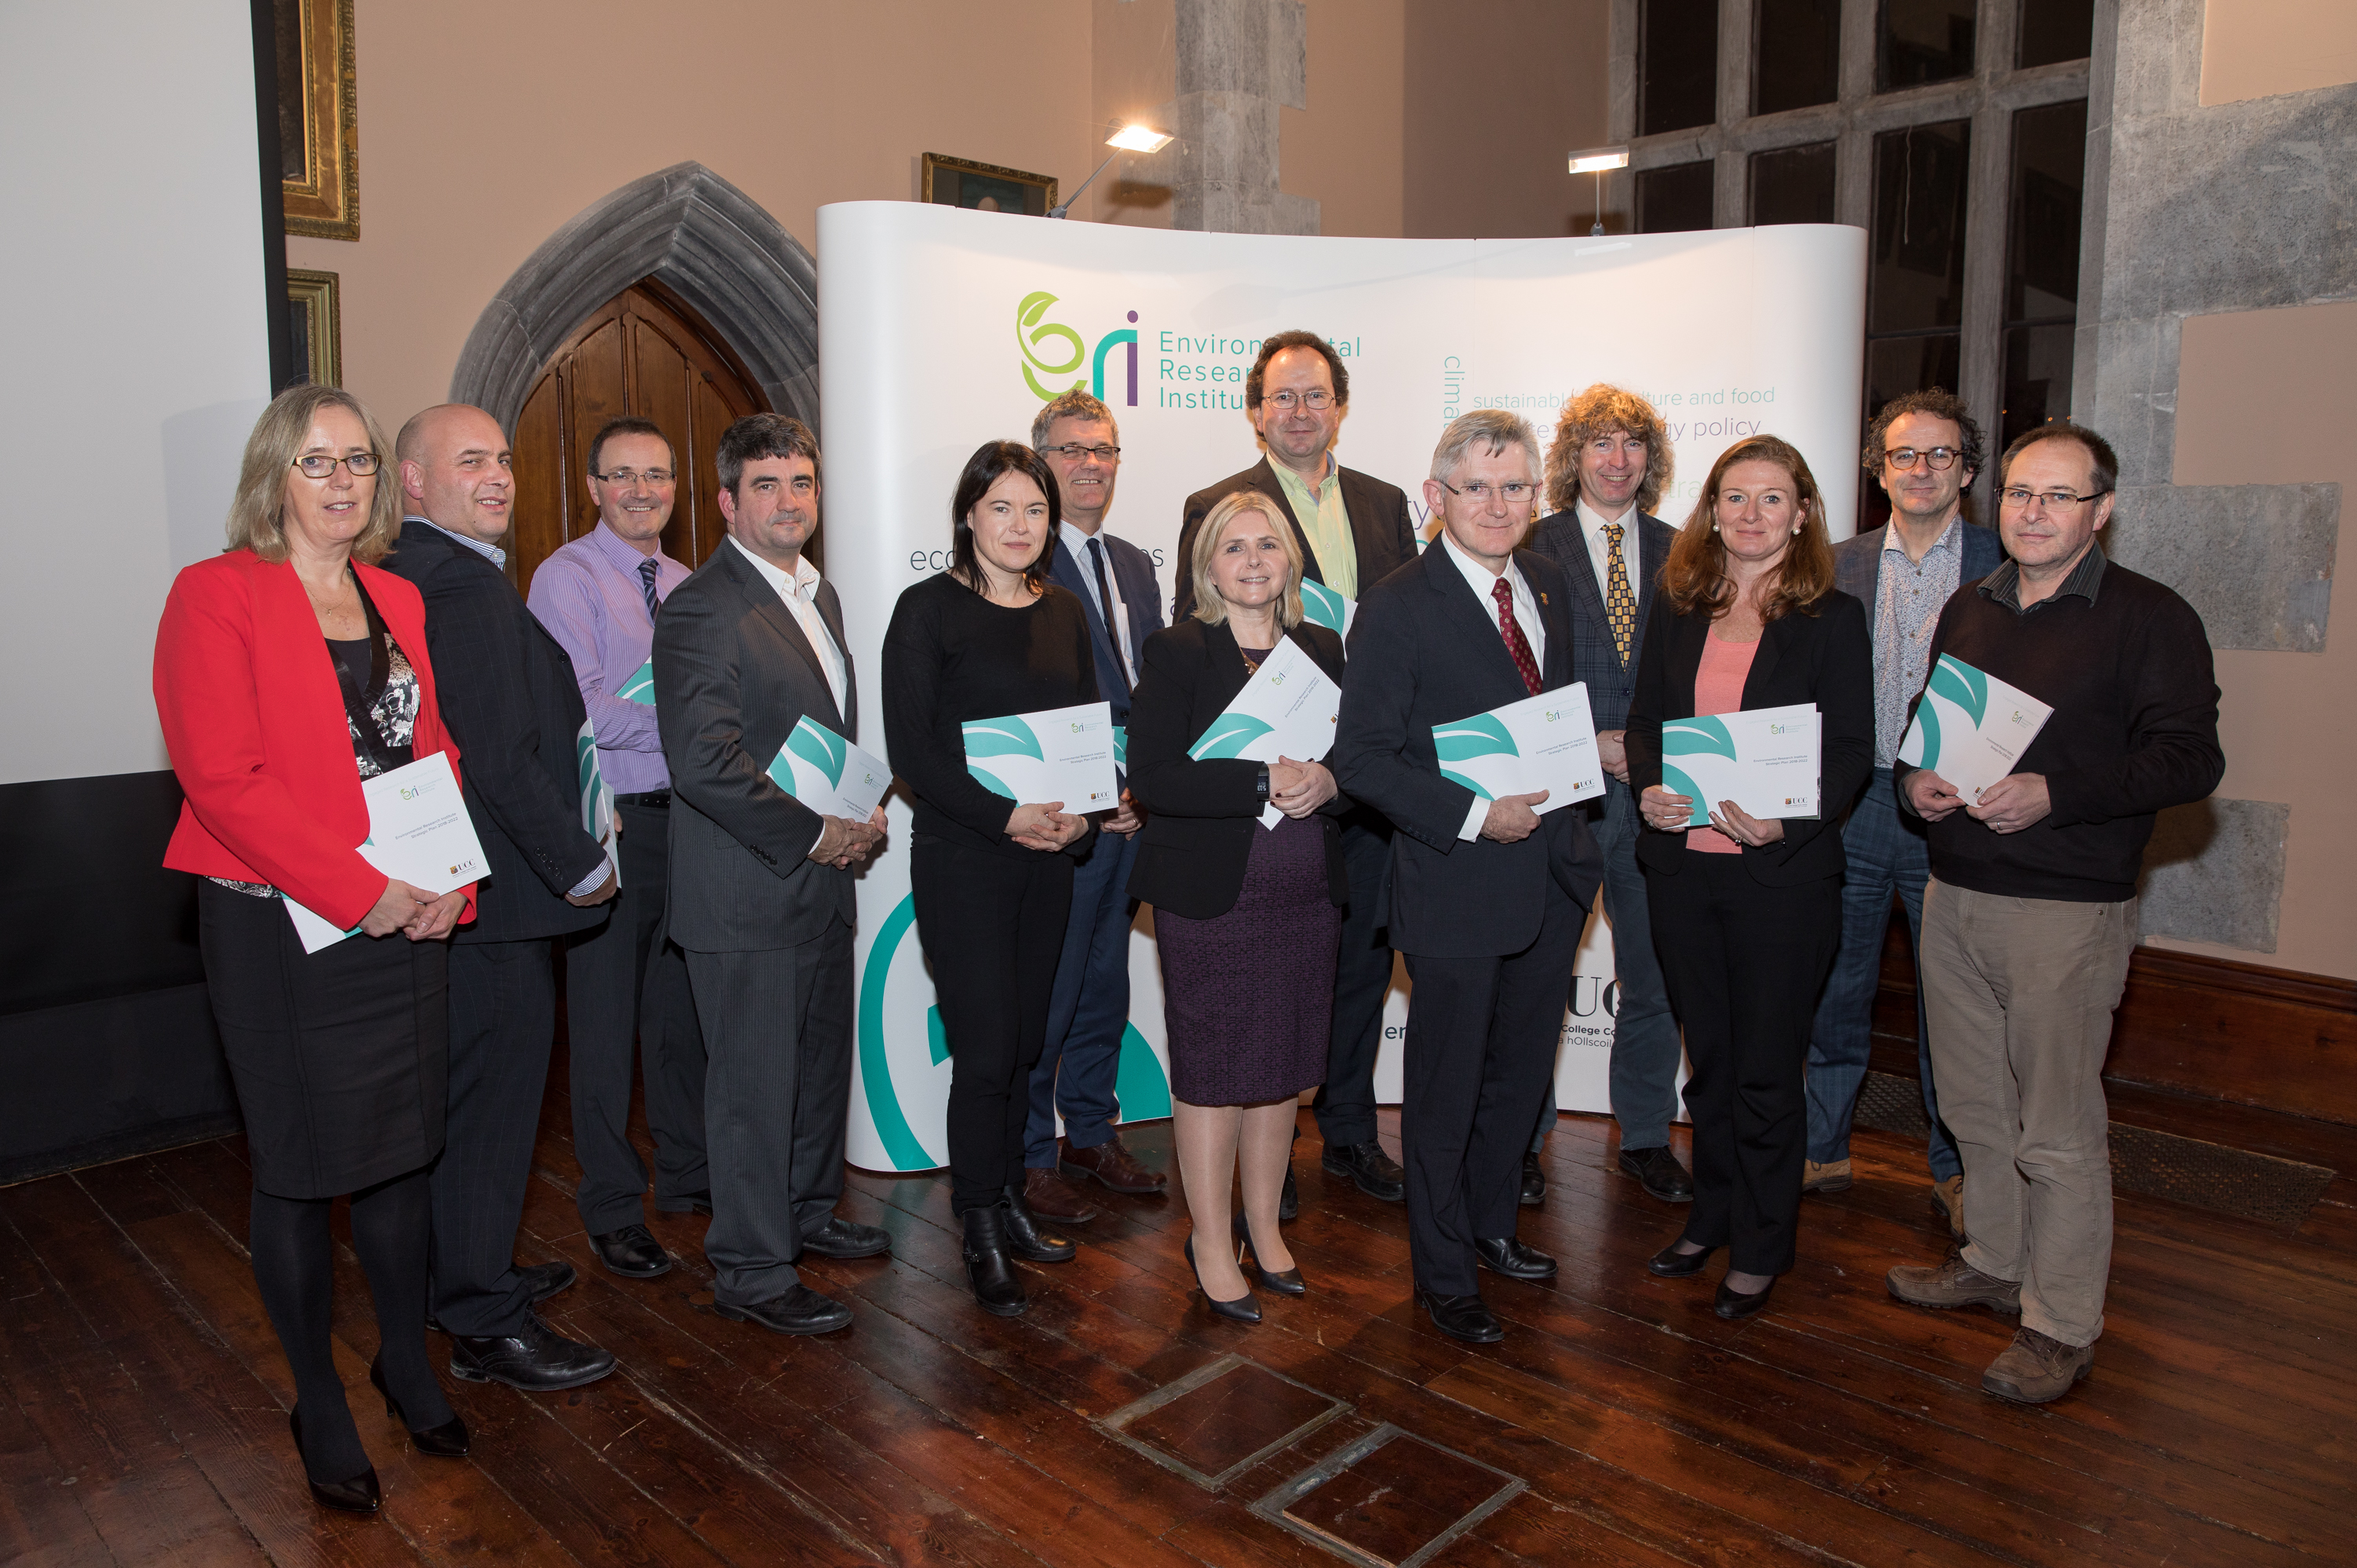 UCC’s Environmental Research Institute launches new Strategic Plan 2018-2022
